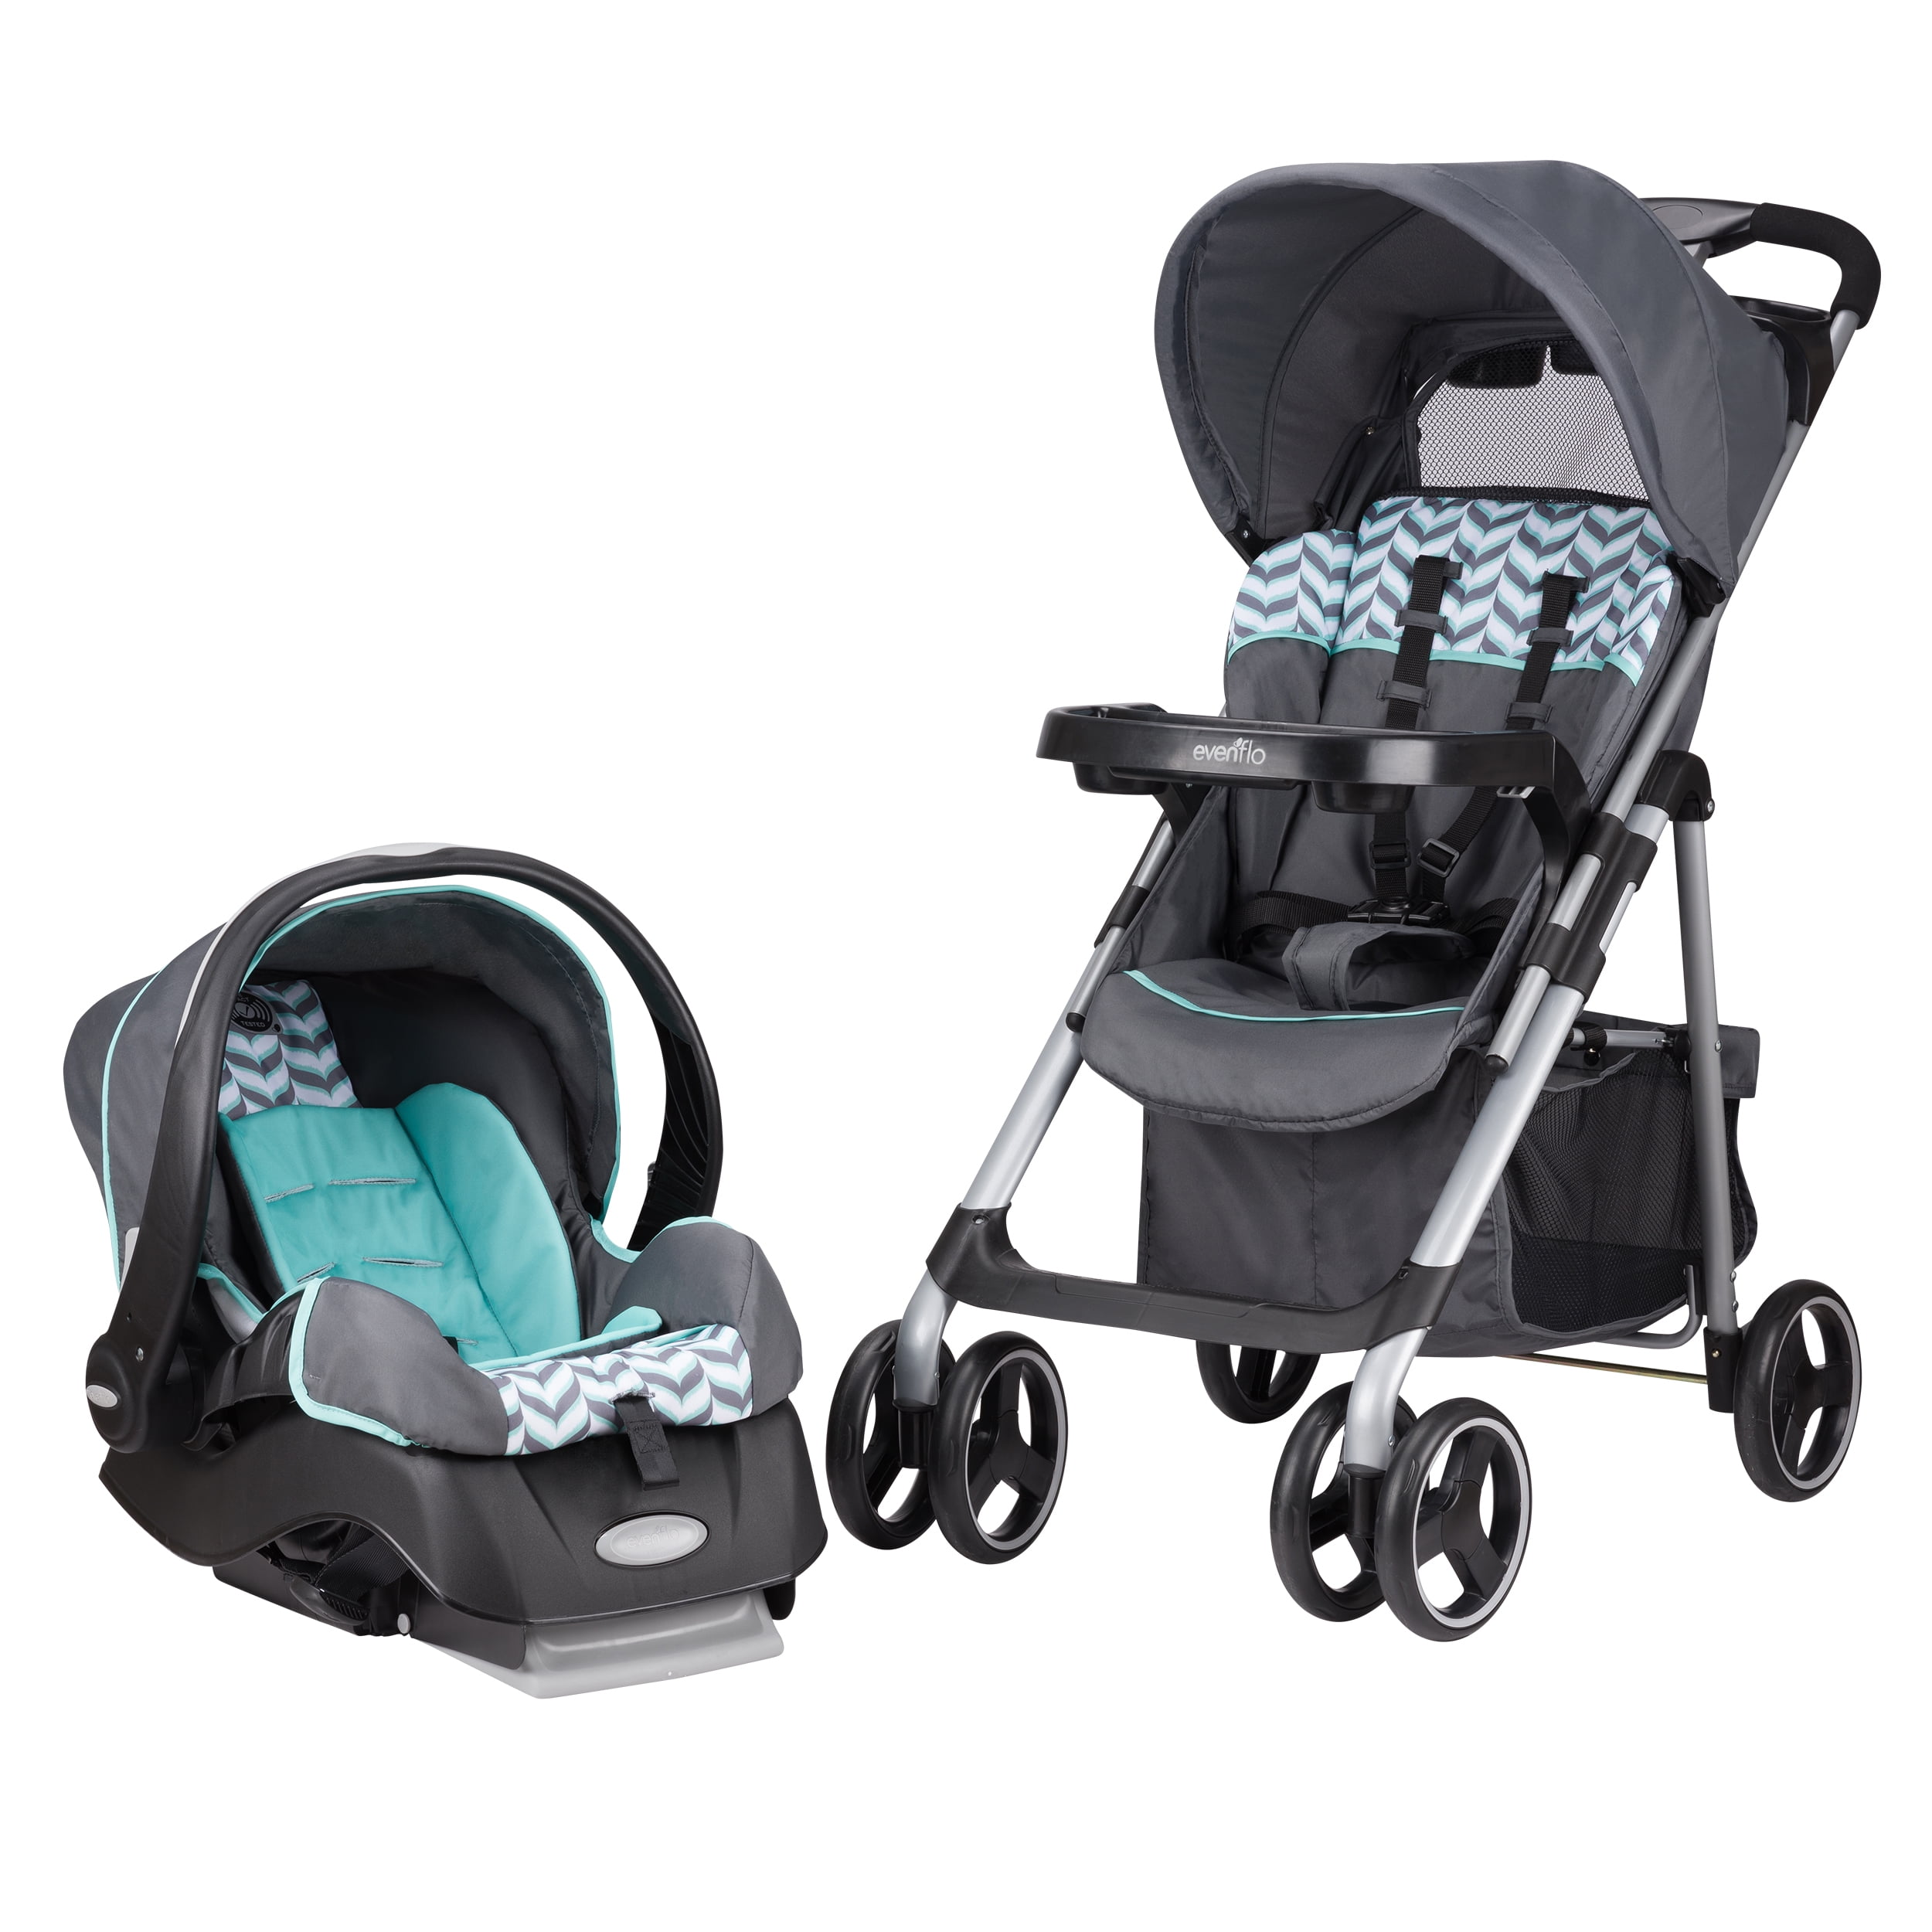 evenflo travel system safety ratings